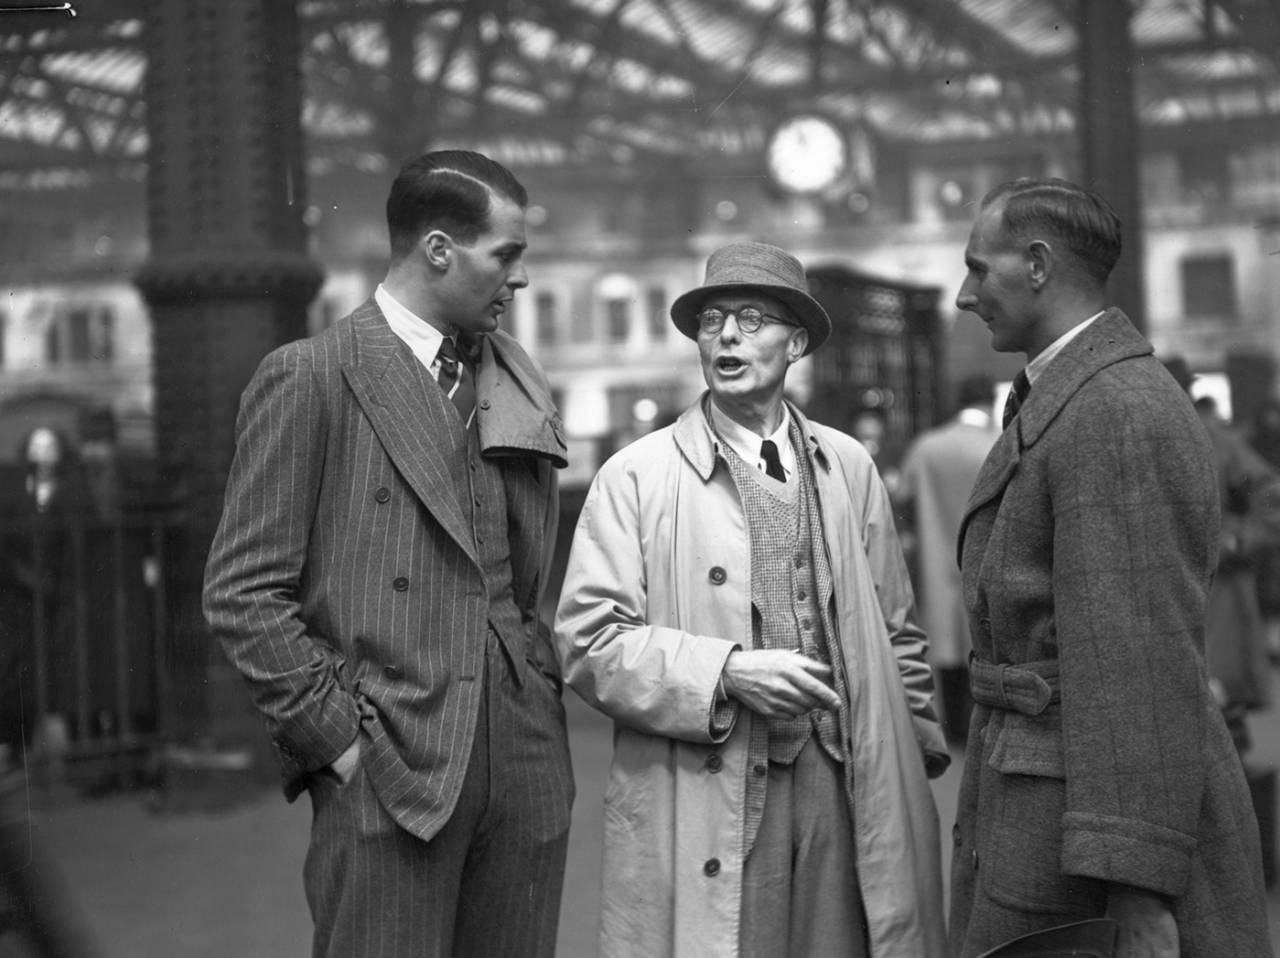 Ken Farnes (left) and Hedley Verity (right) are met by Farnes' father at Waterloo Station on their return from the tour. Verity bowled more than 95 overs in the Durban Test&nbsp;&nbsp;&bull;&nbsp;&nbsp;Getty Images